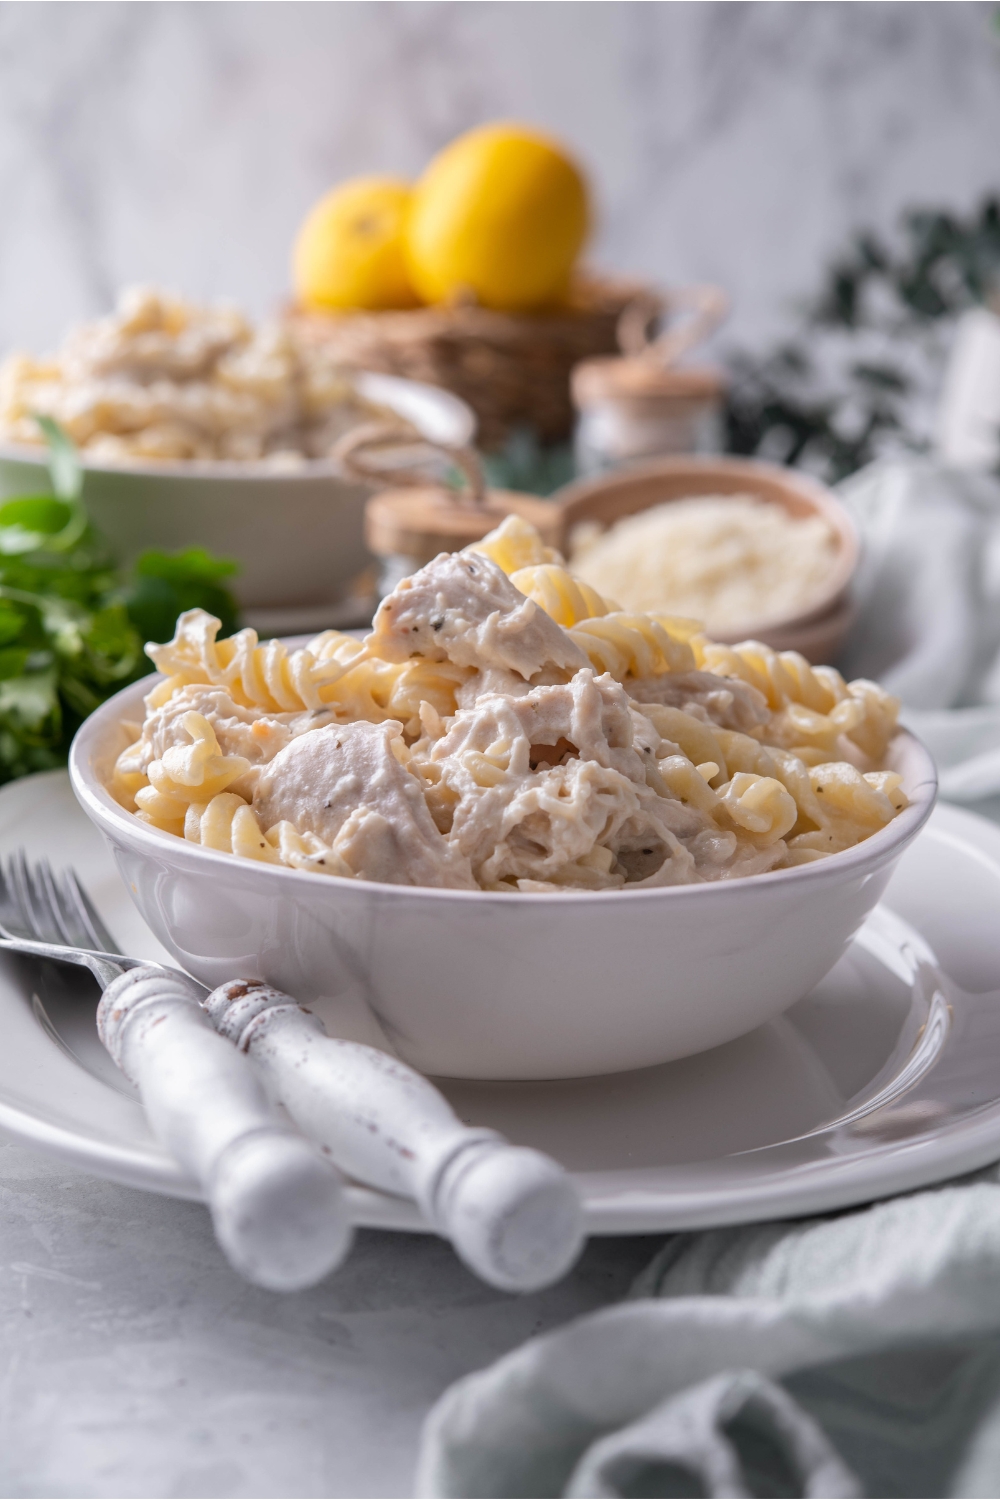 A bowl of pasta and chicken in a cream sauce atop a white plate with two forks next to the bowl.